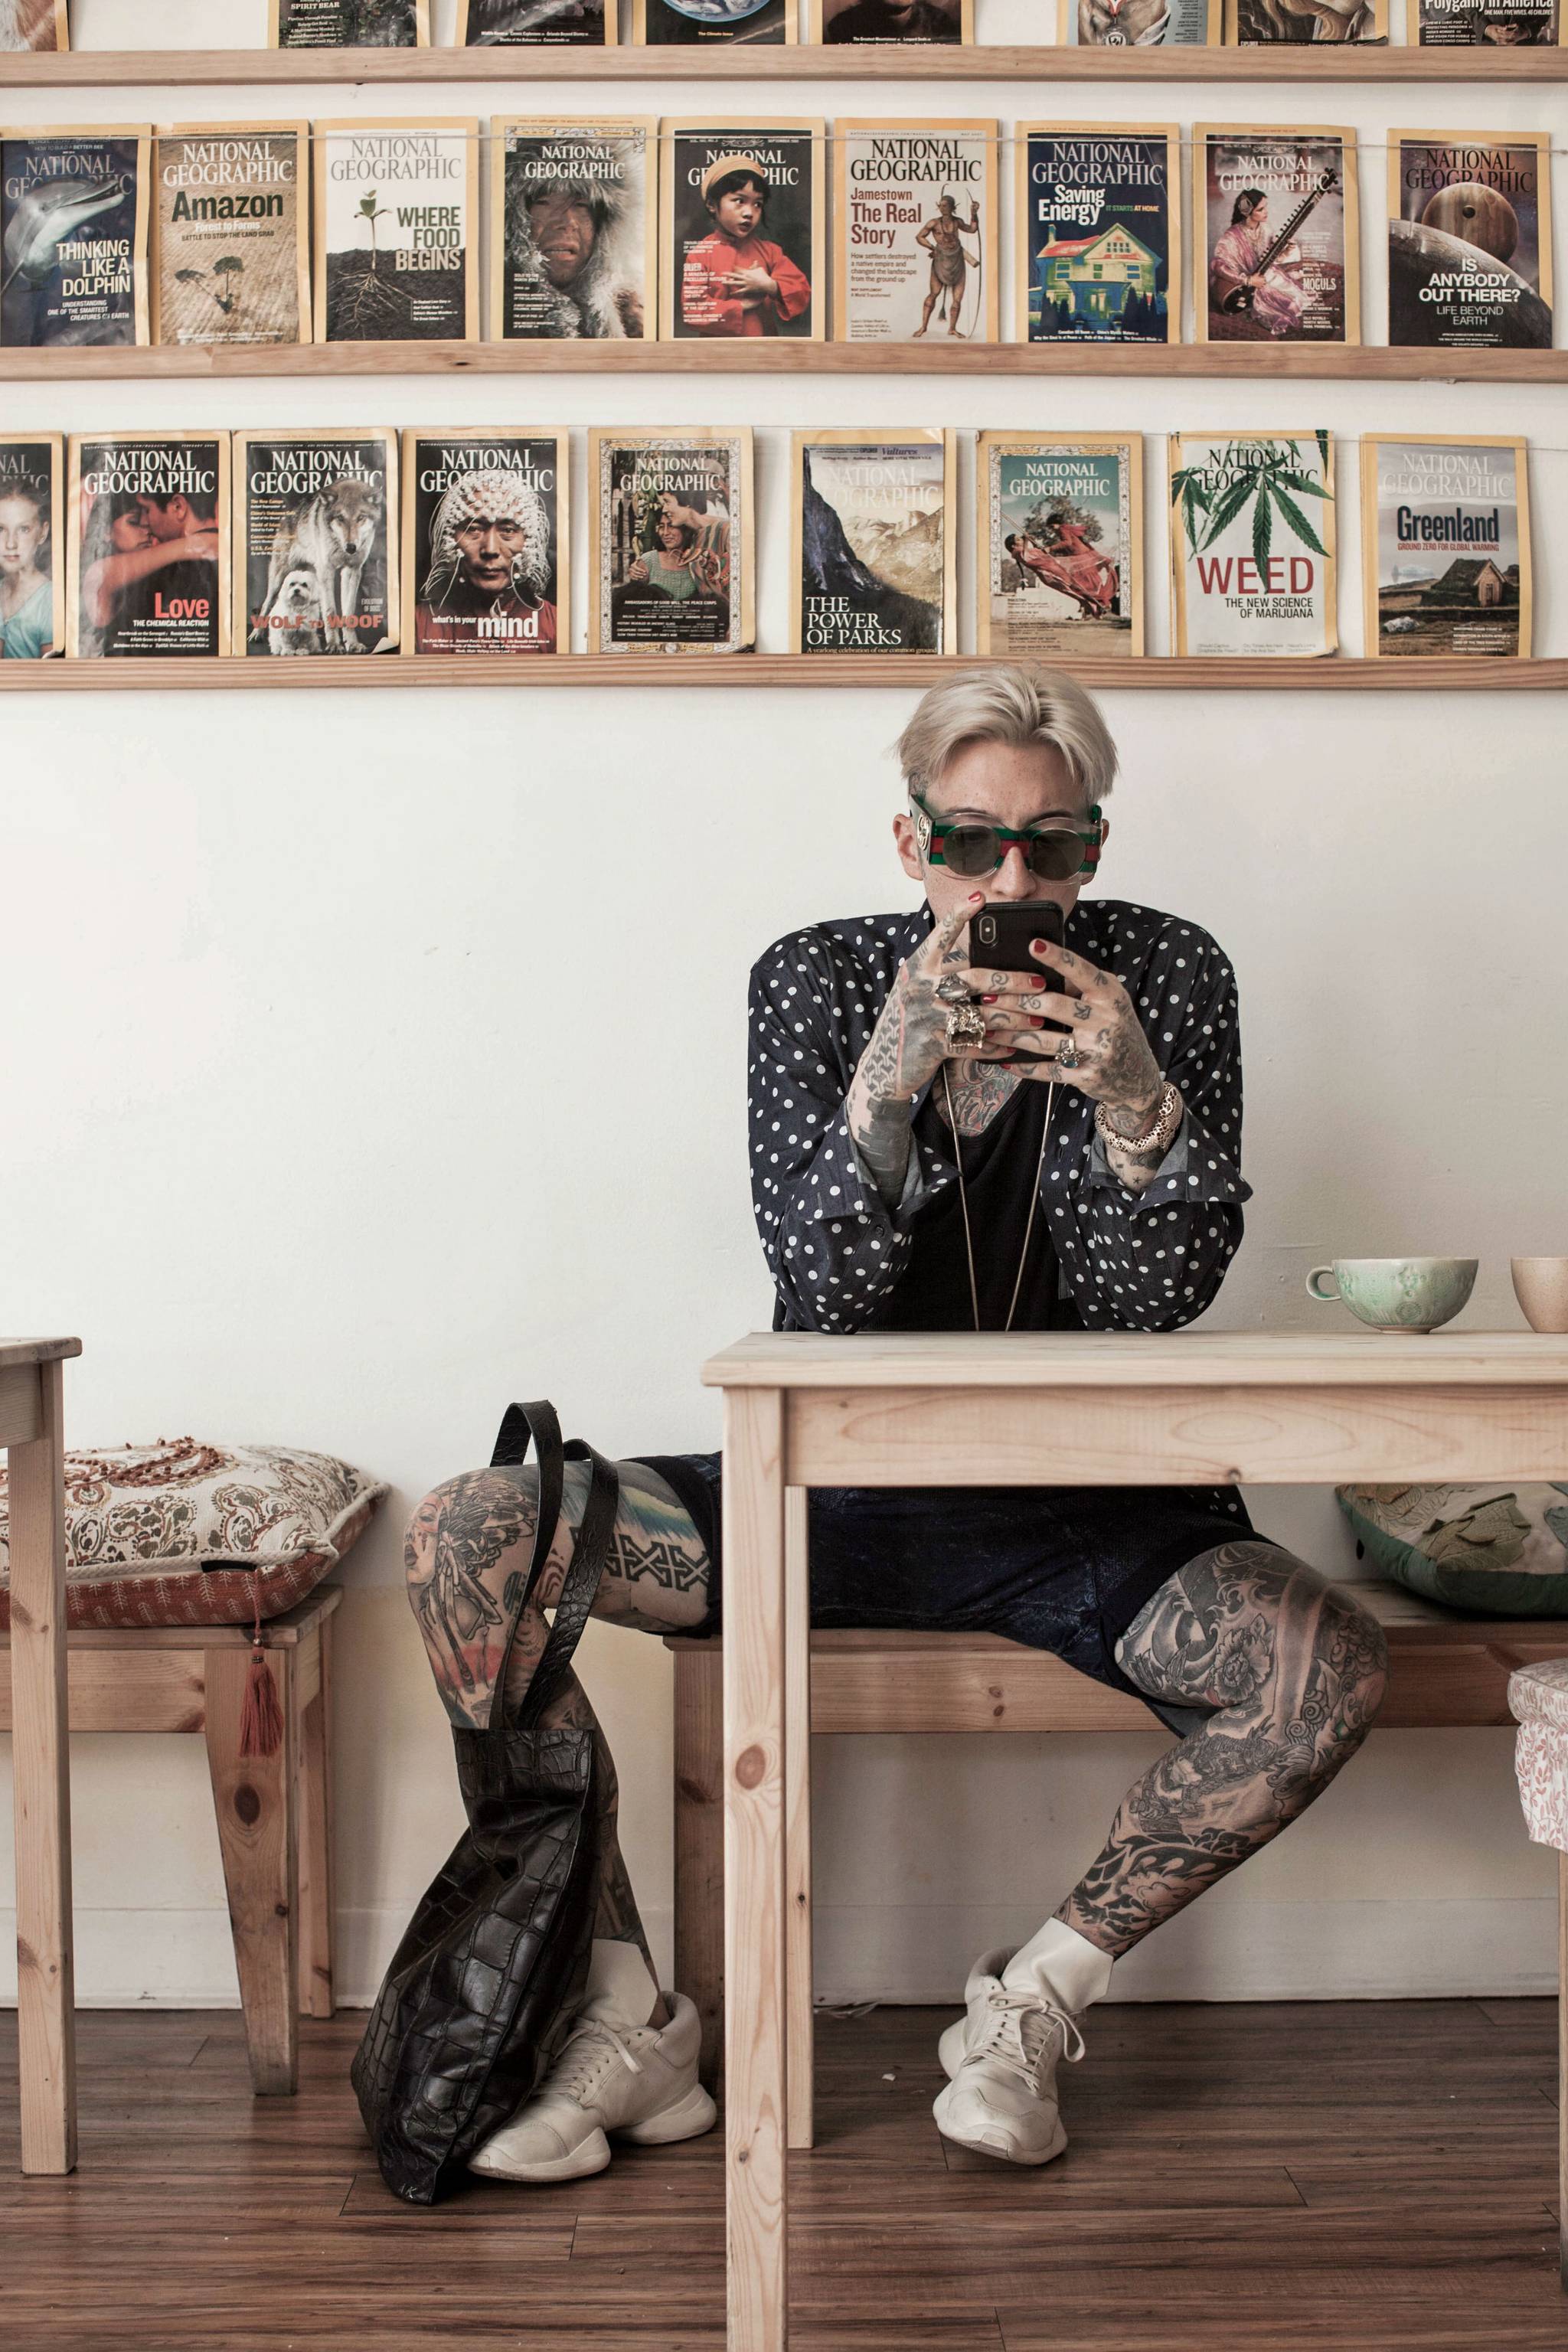 How have tattoos gone mainstream?